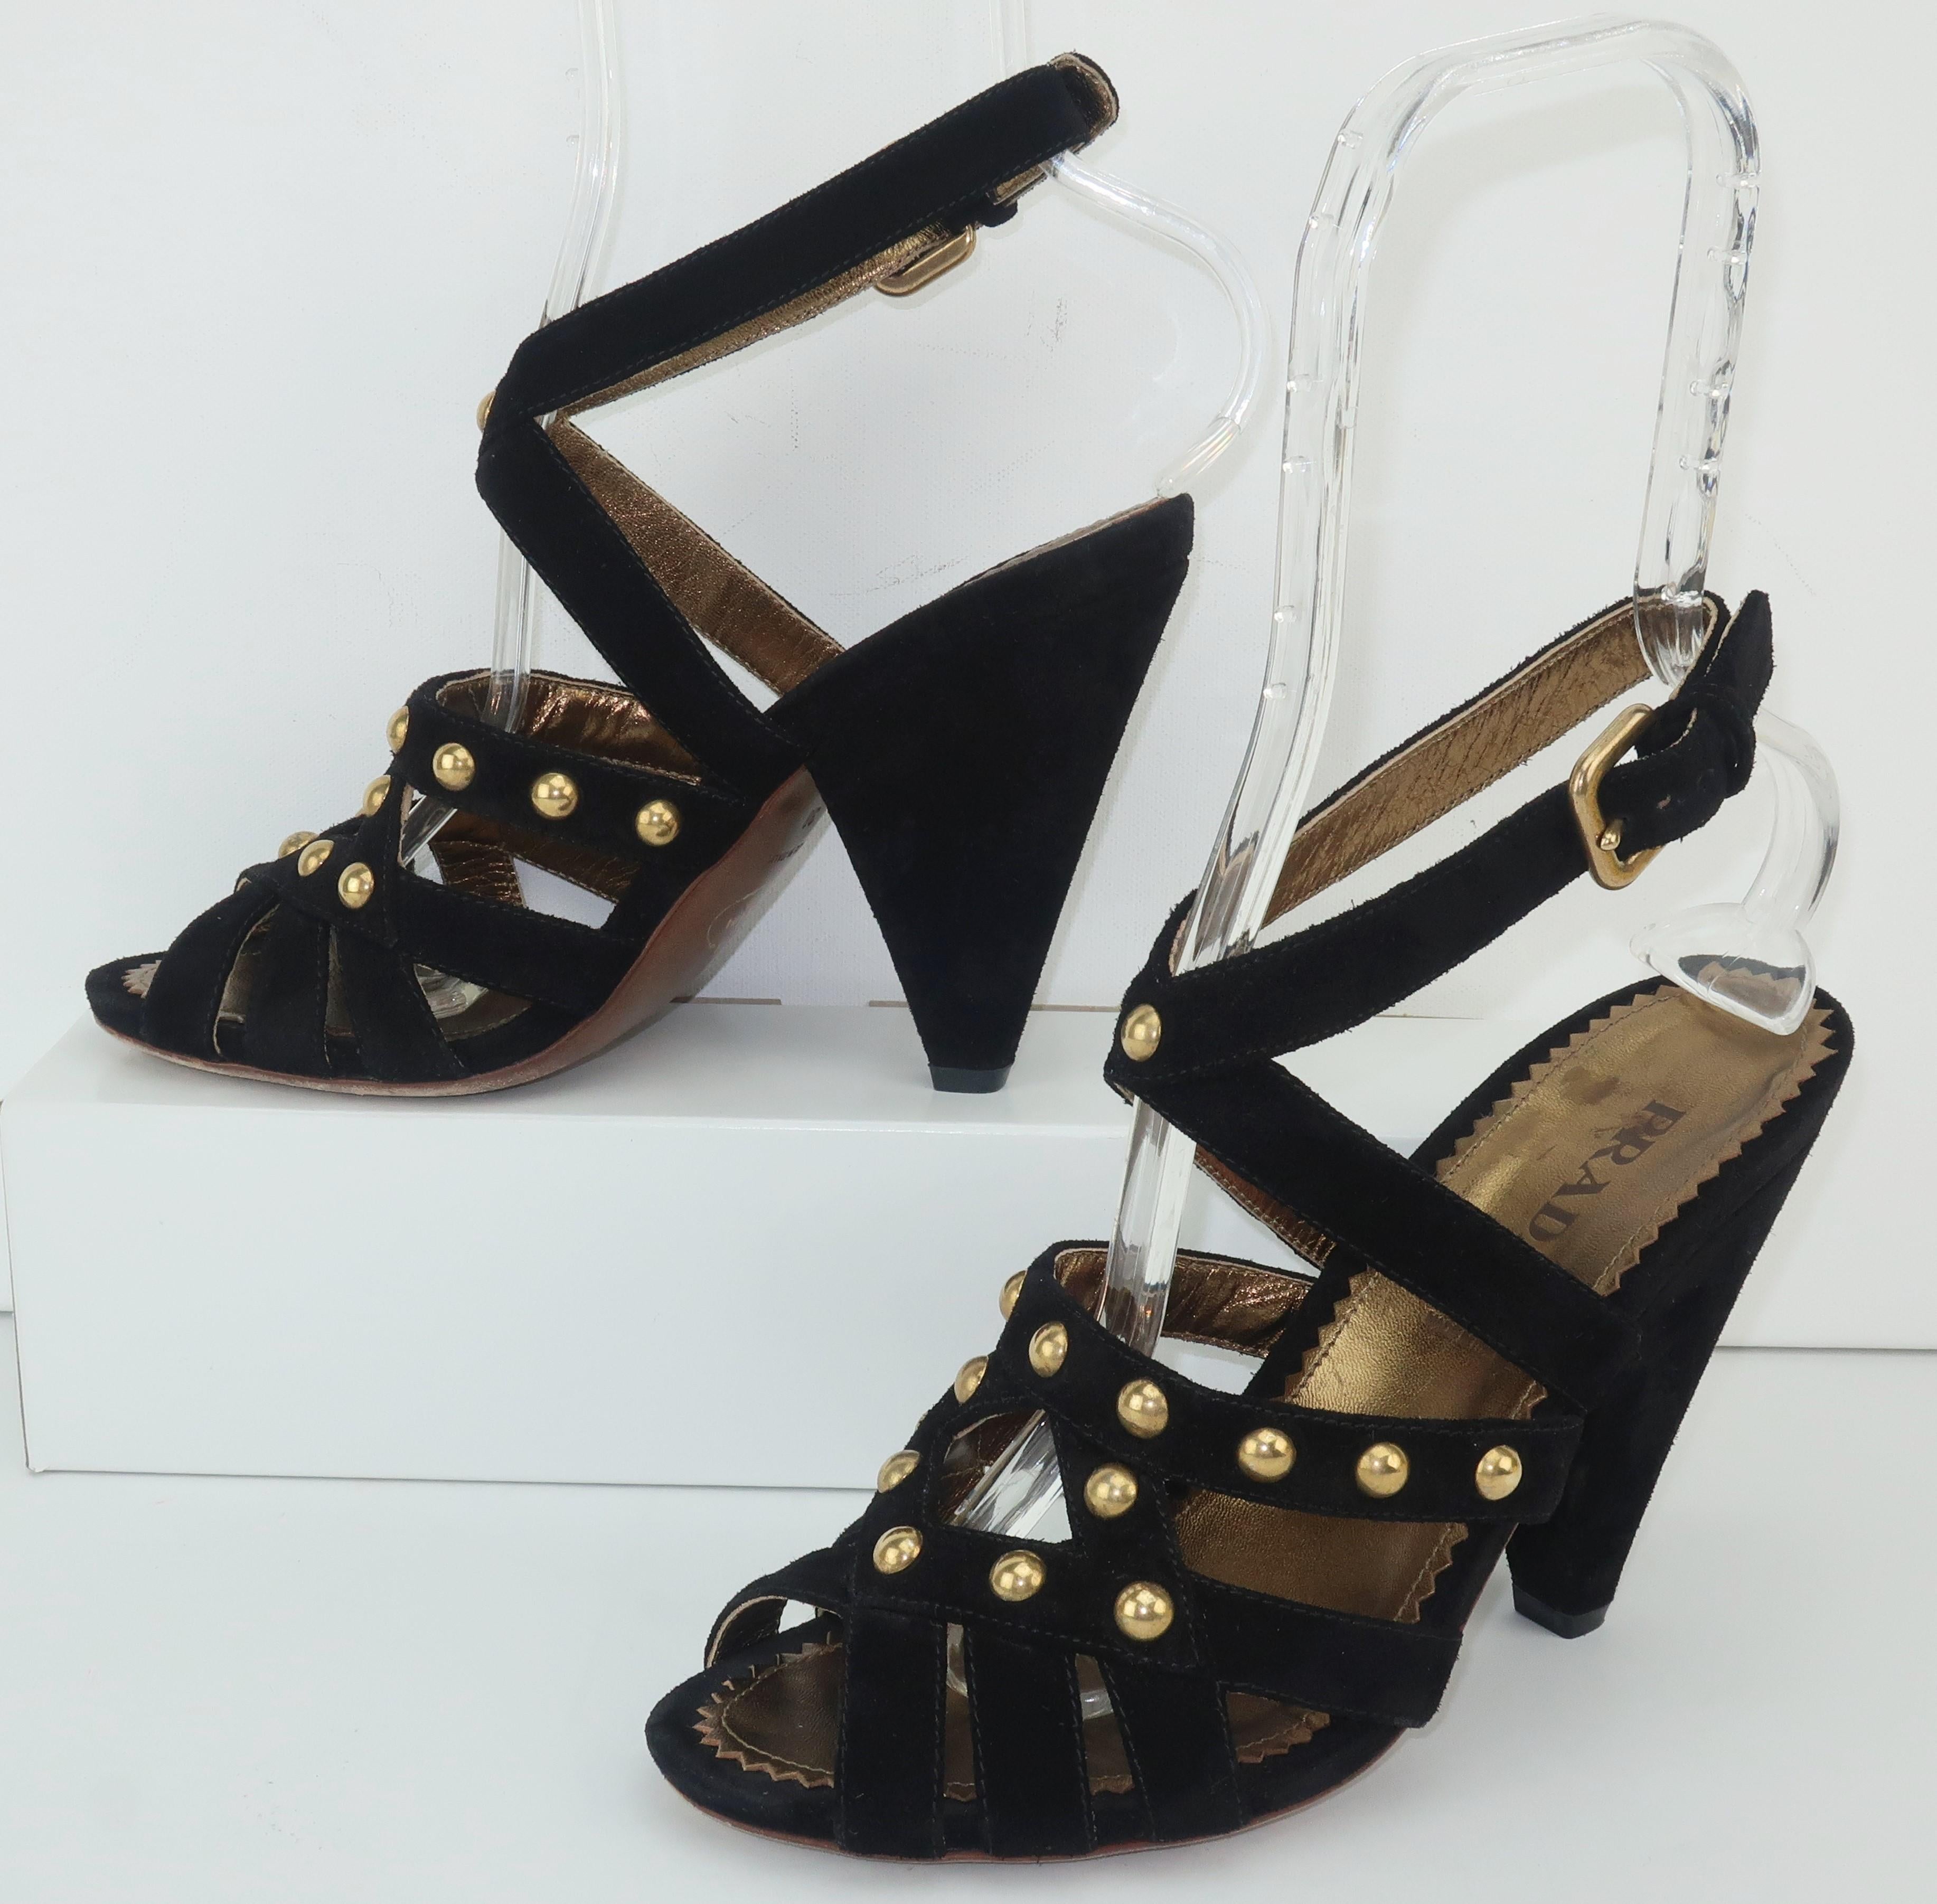 These contemporary Prada shoes have a good dose of inspiration from the avant-garde fashions of the 1930's.  The black suede strappy upper sports an adjustable buckle at the ankle and is decorated with gold studs.  The cone shaped 4.5